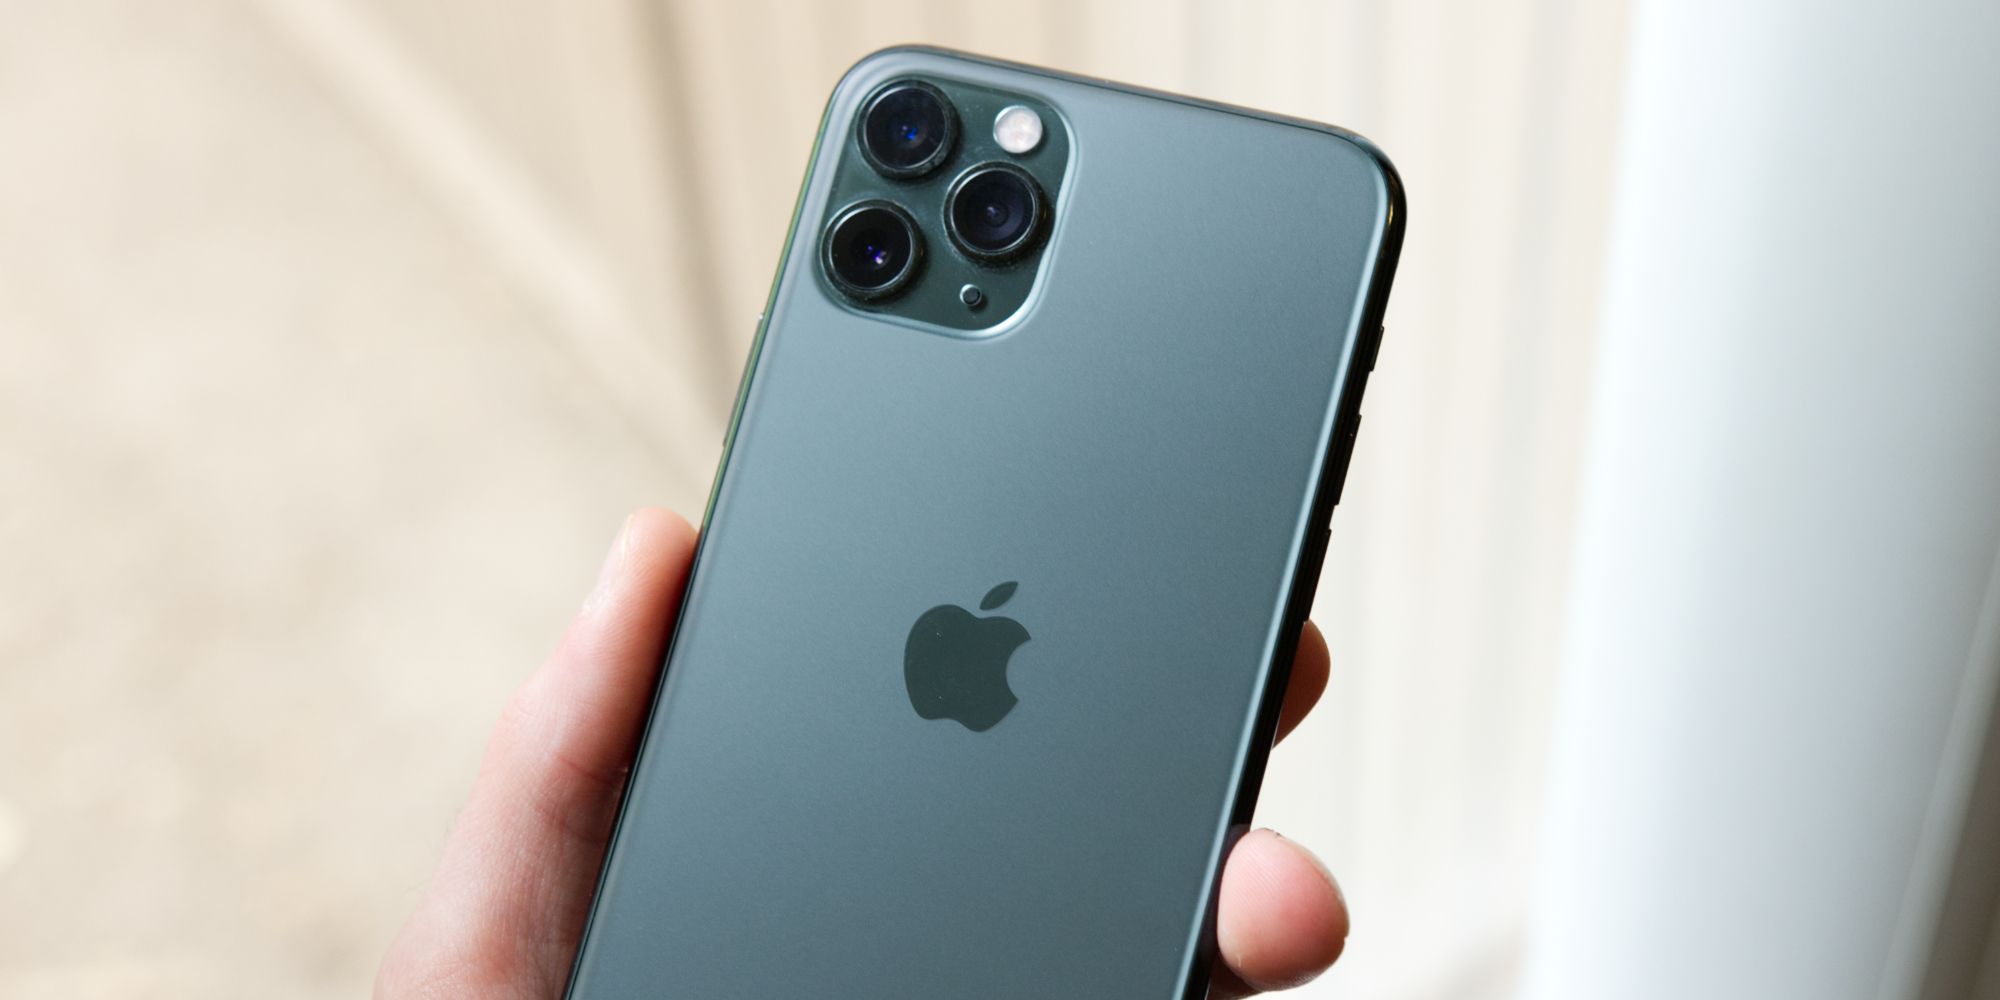 The back of an iPhone 11 Pro in green